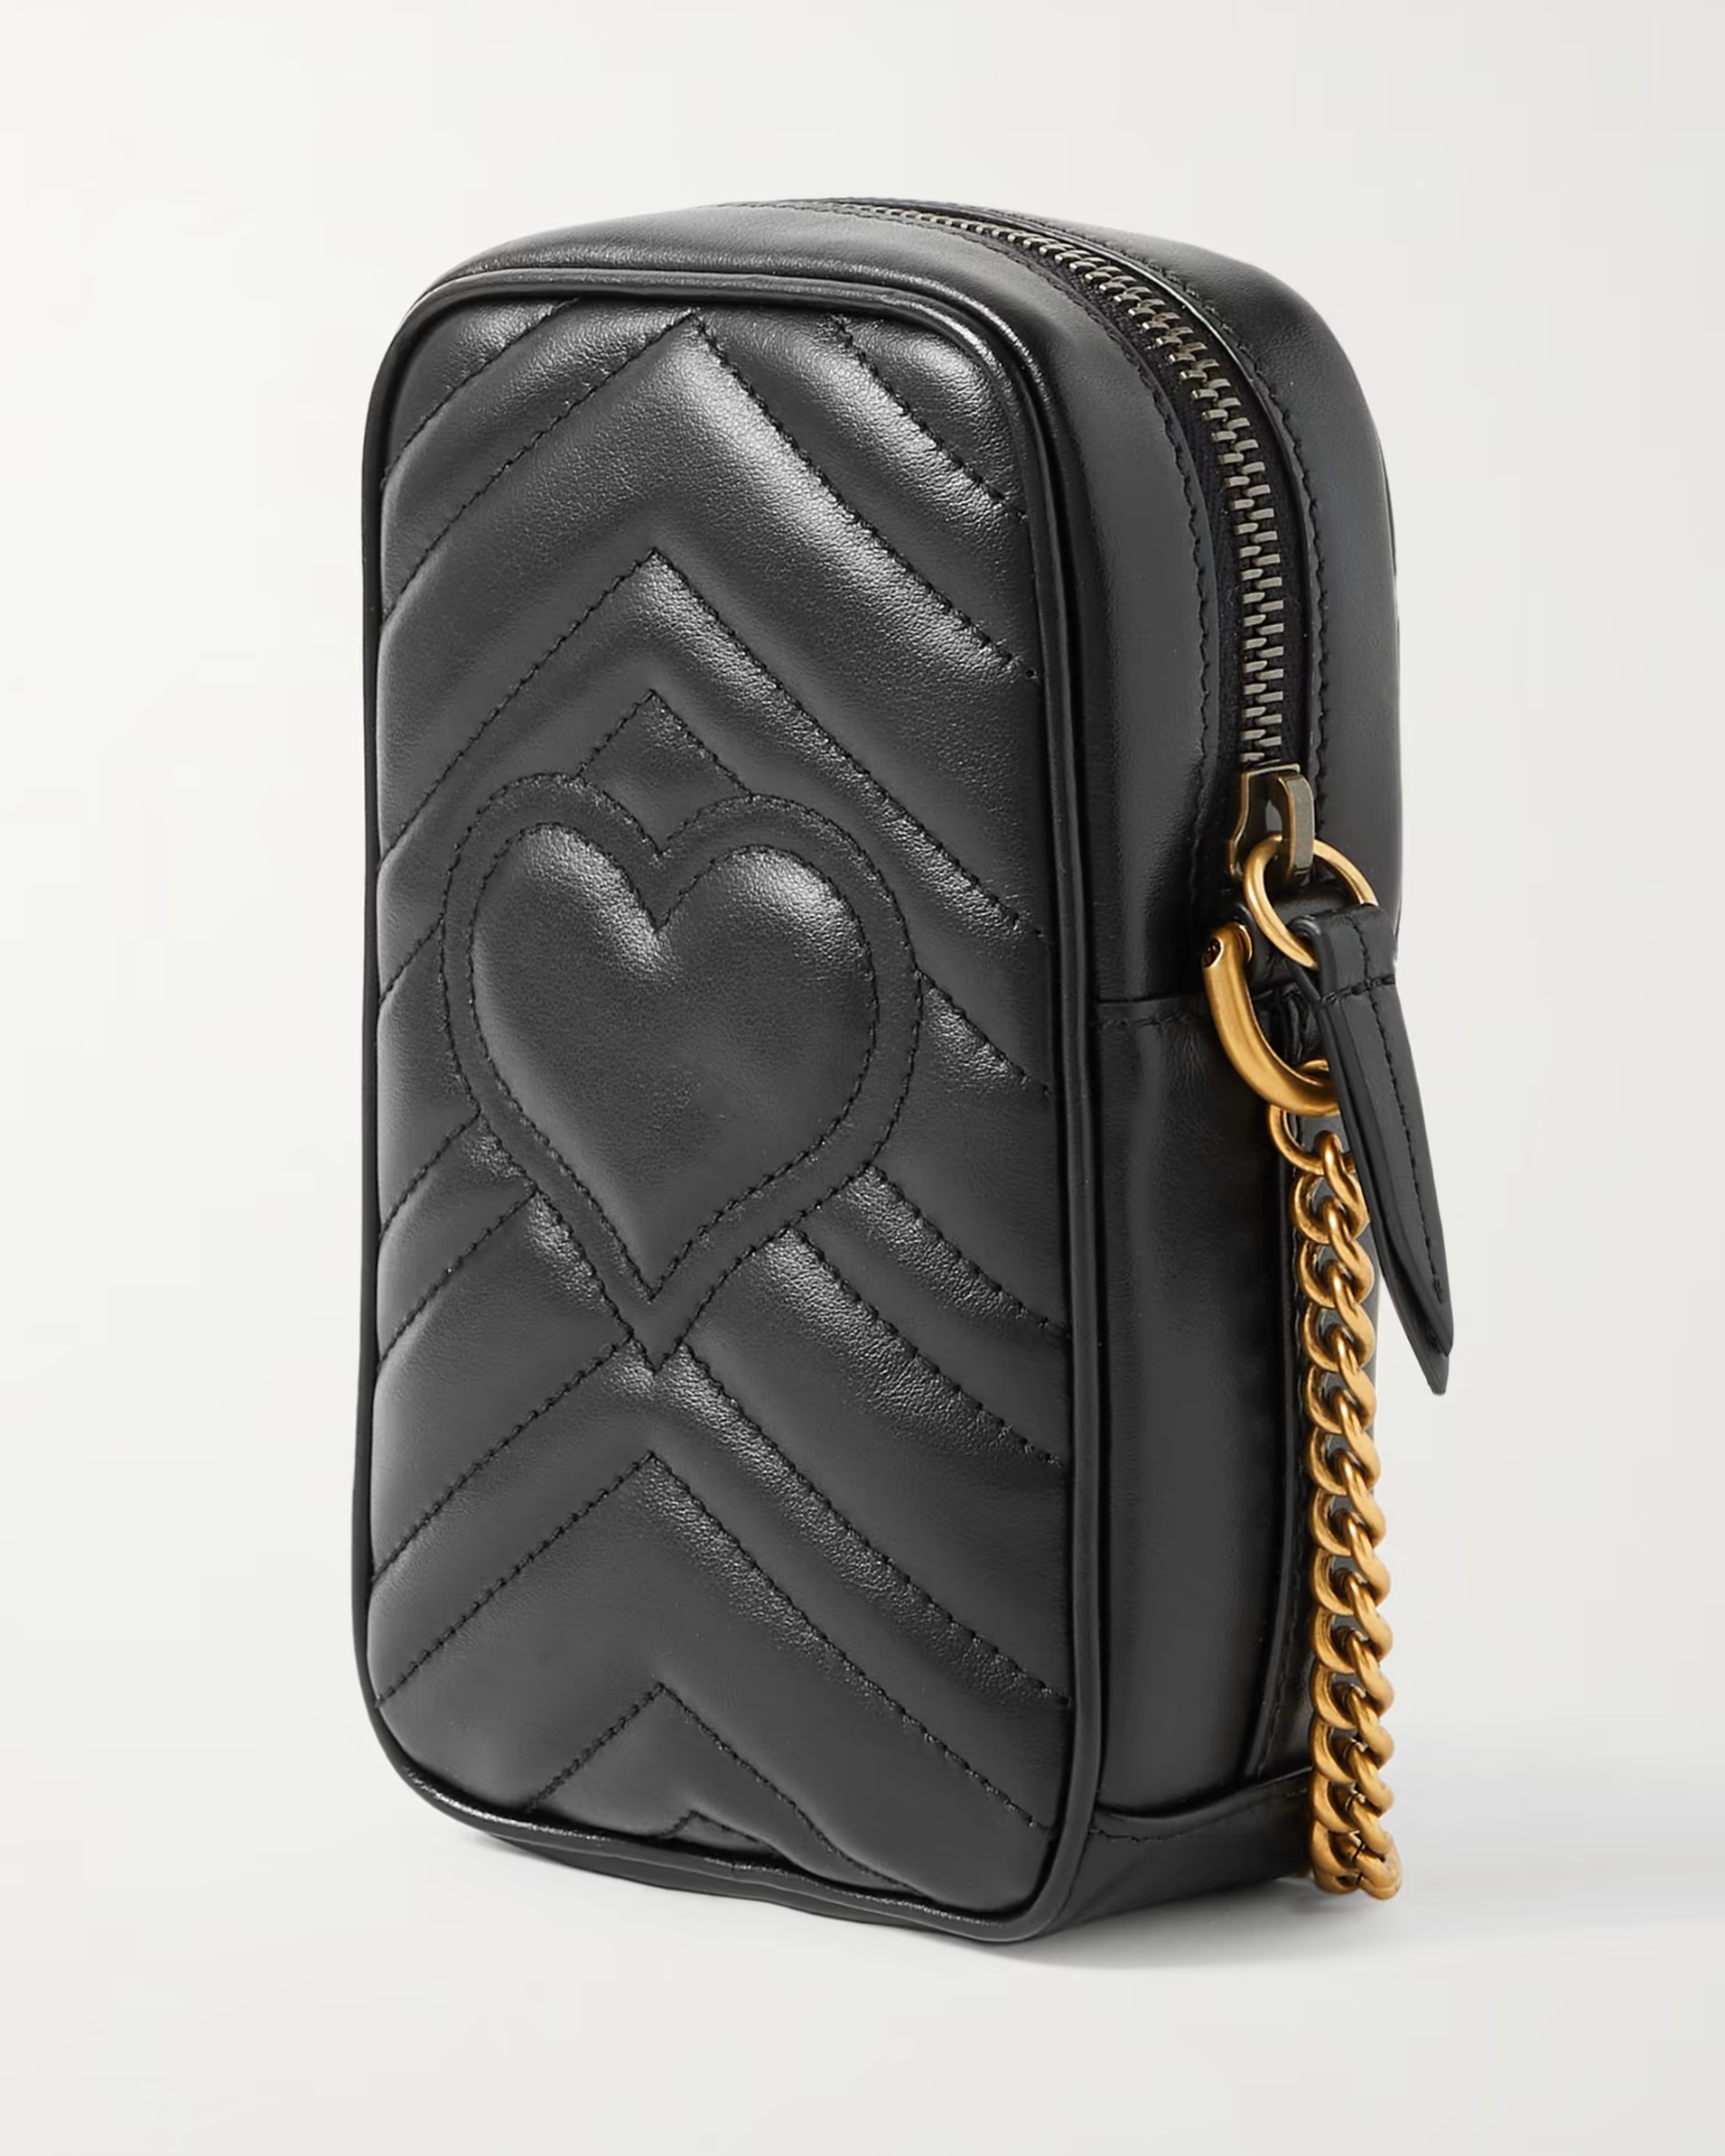 TÚI ĐEO ĐIỆN THOẠI GUCCI GG MARMONT MINI BLACK QUILTED LEATHER POUCH 5